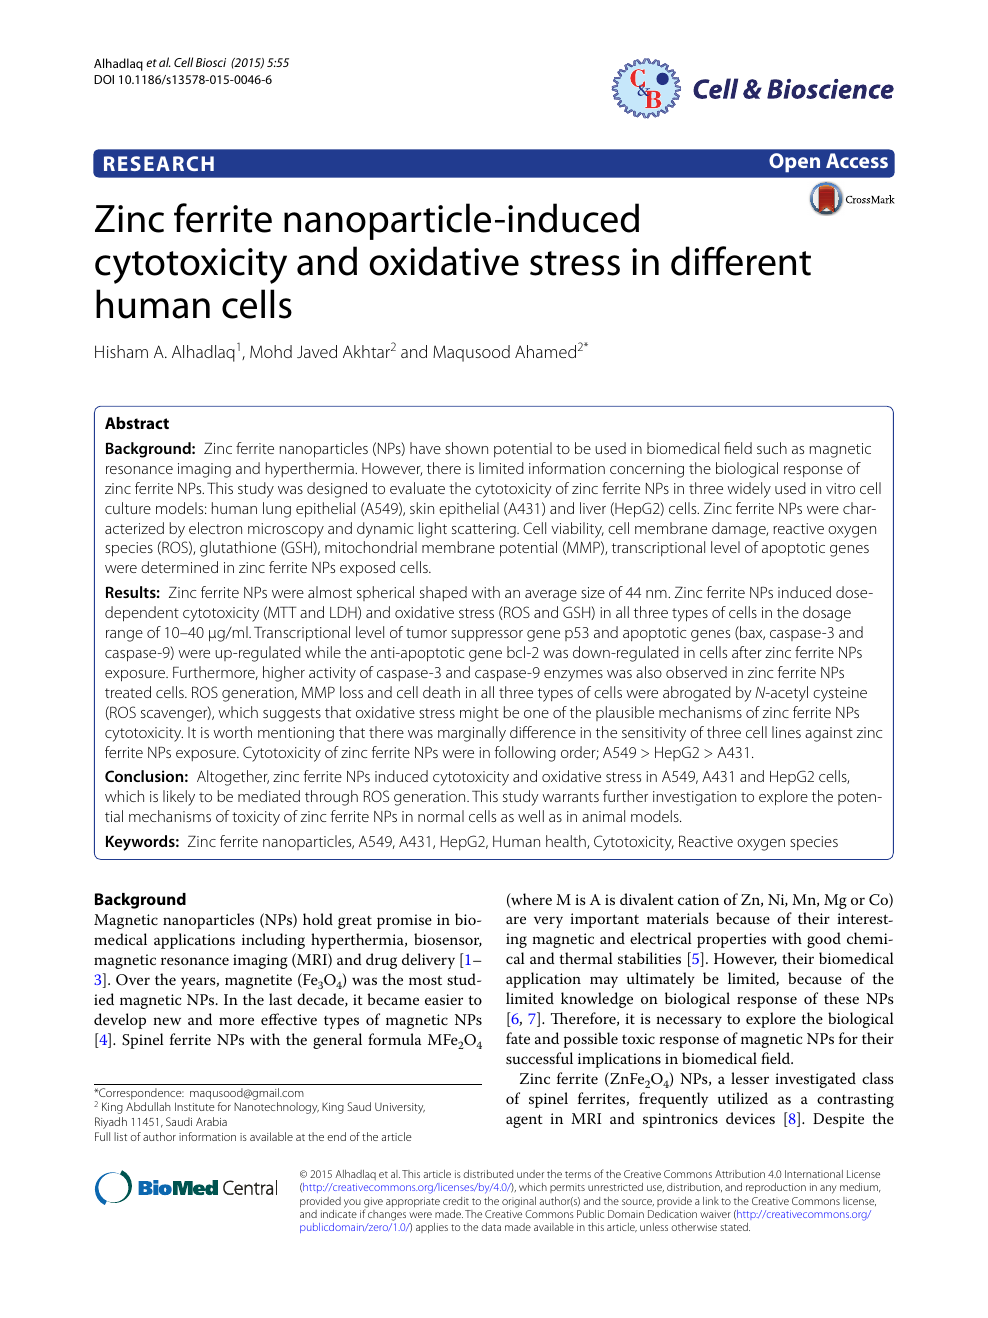 Zinc Ferrite Nanoparticle Induced Cytotoxicity And Oxidative Stress In Different Human Cells Topic Of Research Paper In Nano Technology Download Scholarly Article Pdf And Read For Free On Cyberleninka Open Science Hub